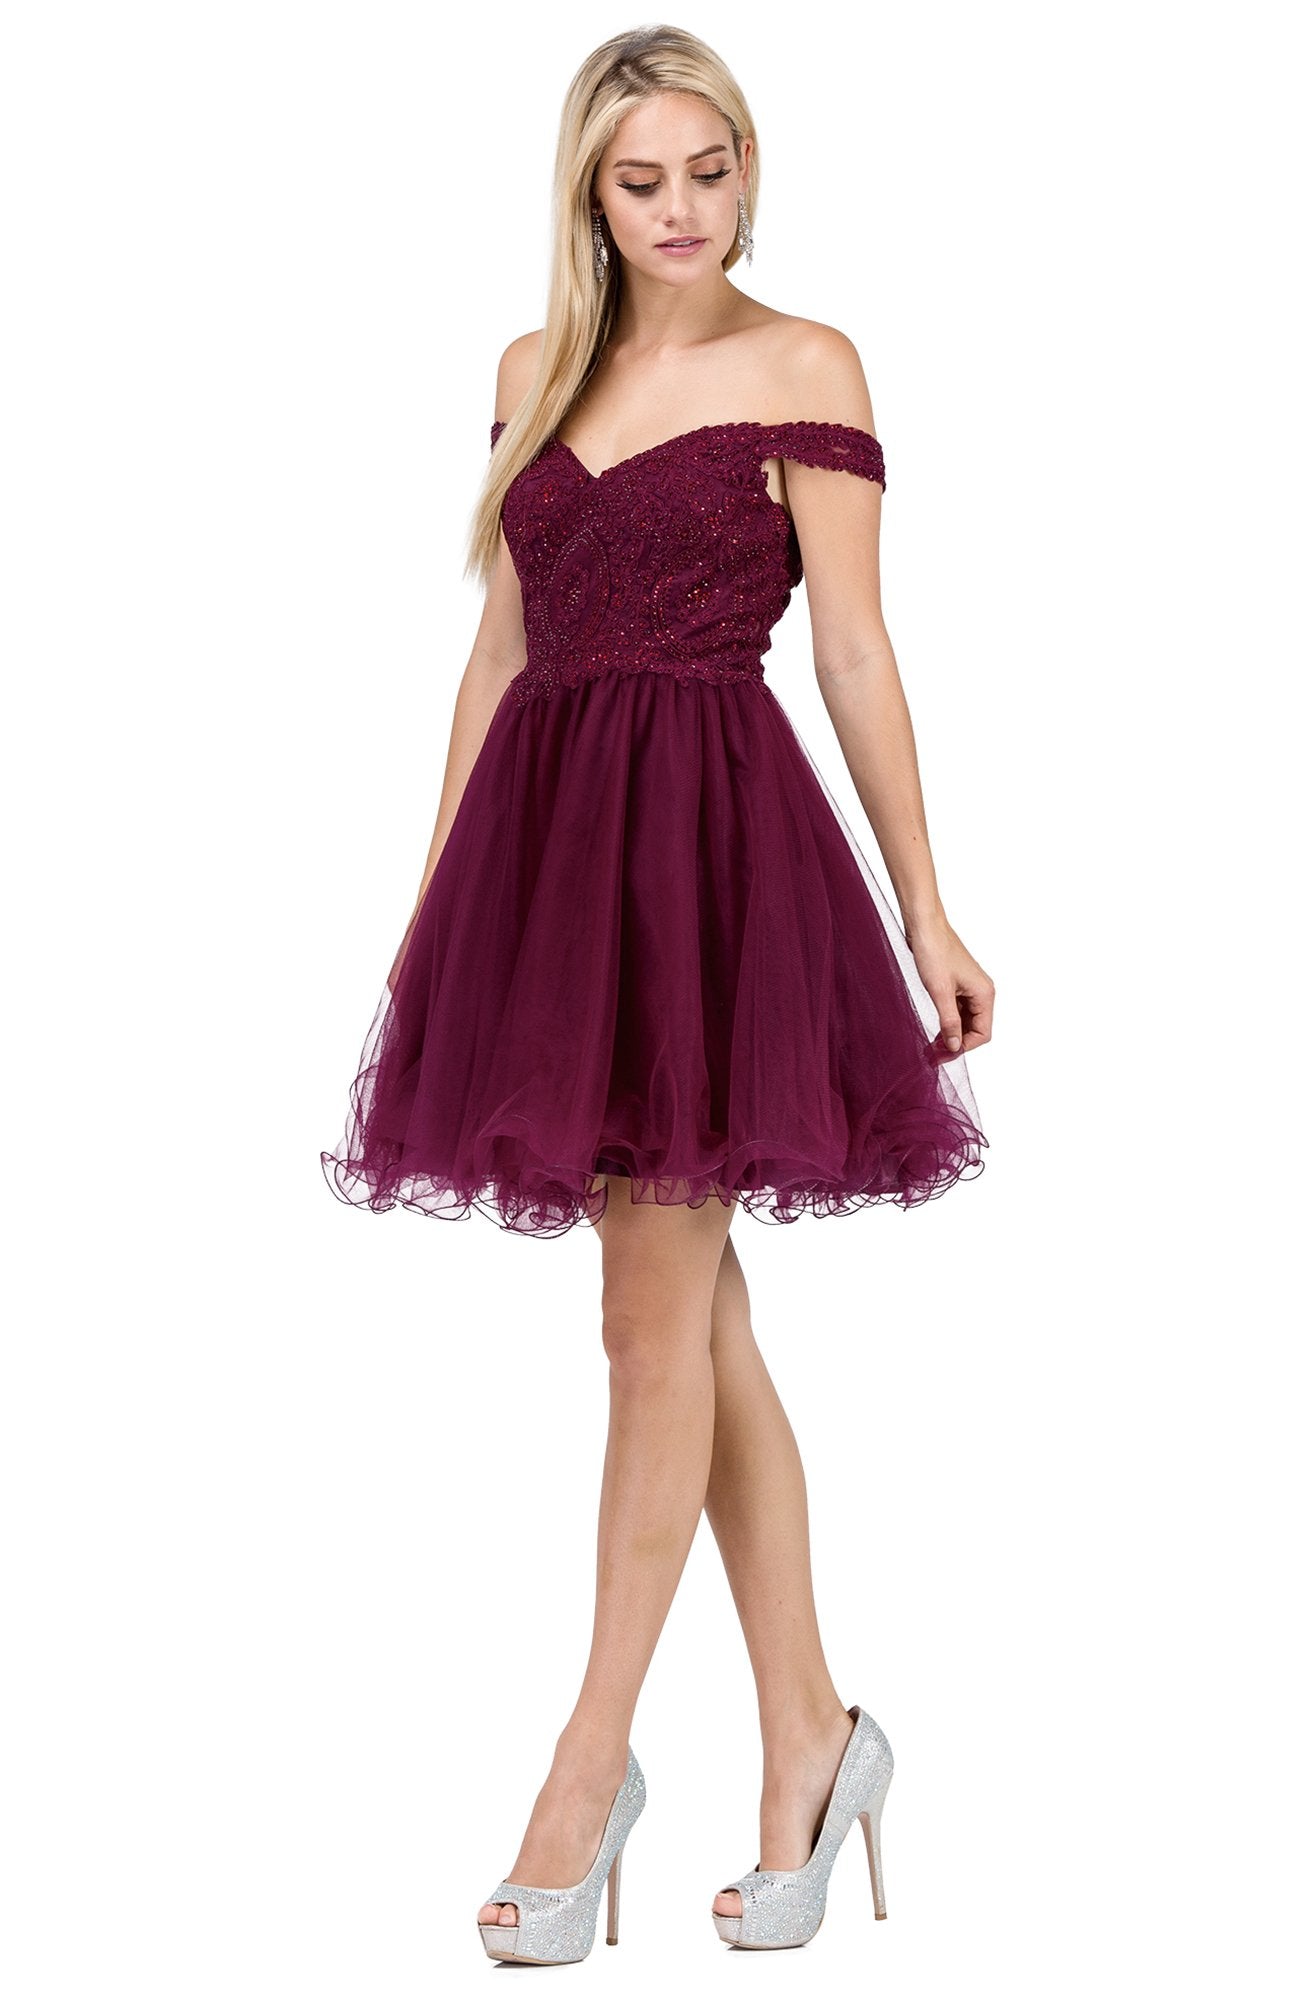 Dancing Queen - 3070 Beaded Lace Fit And Flare Cocktail Dress In Red